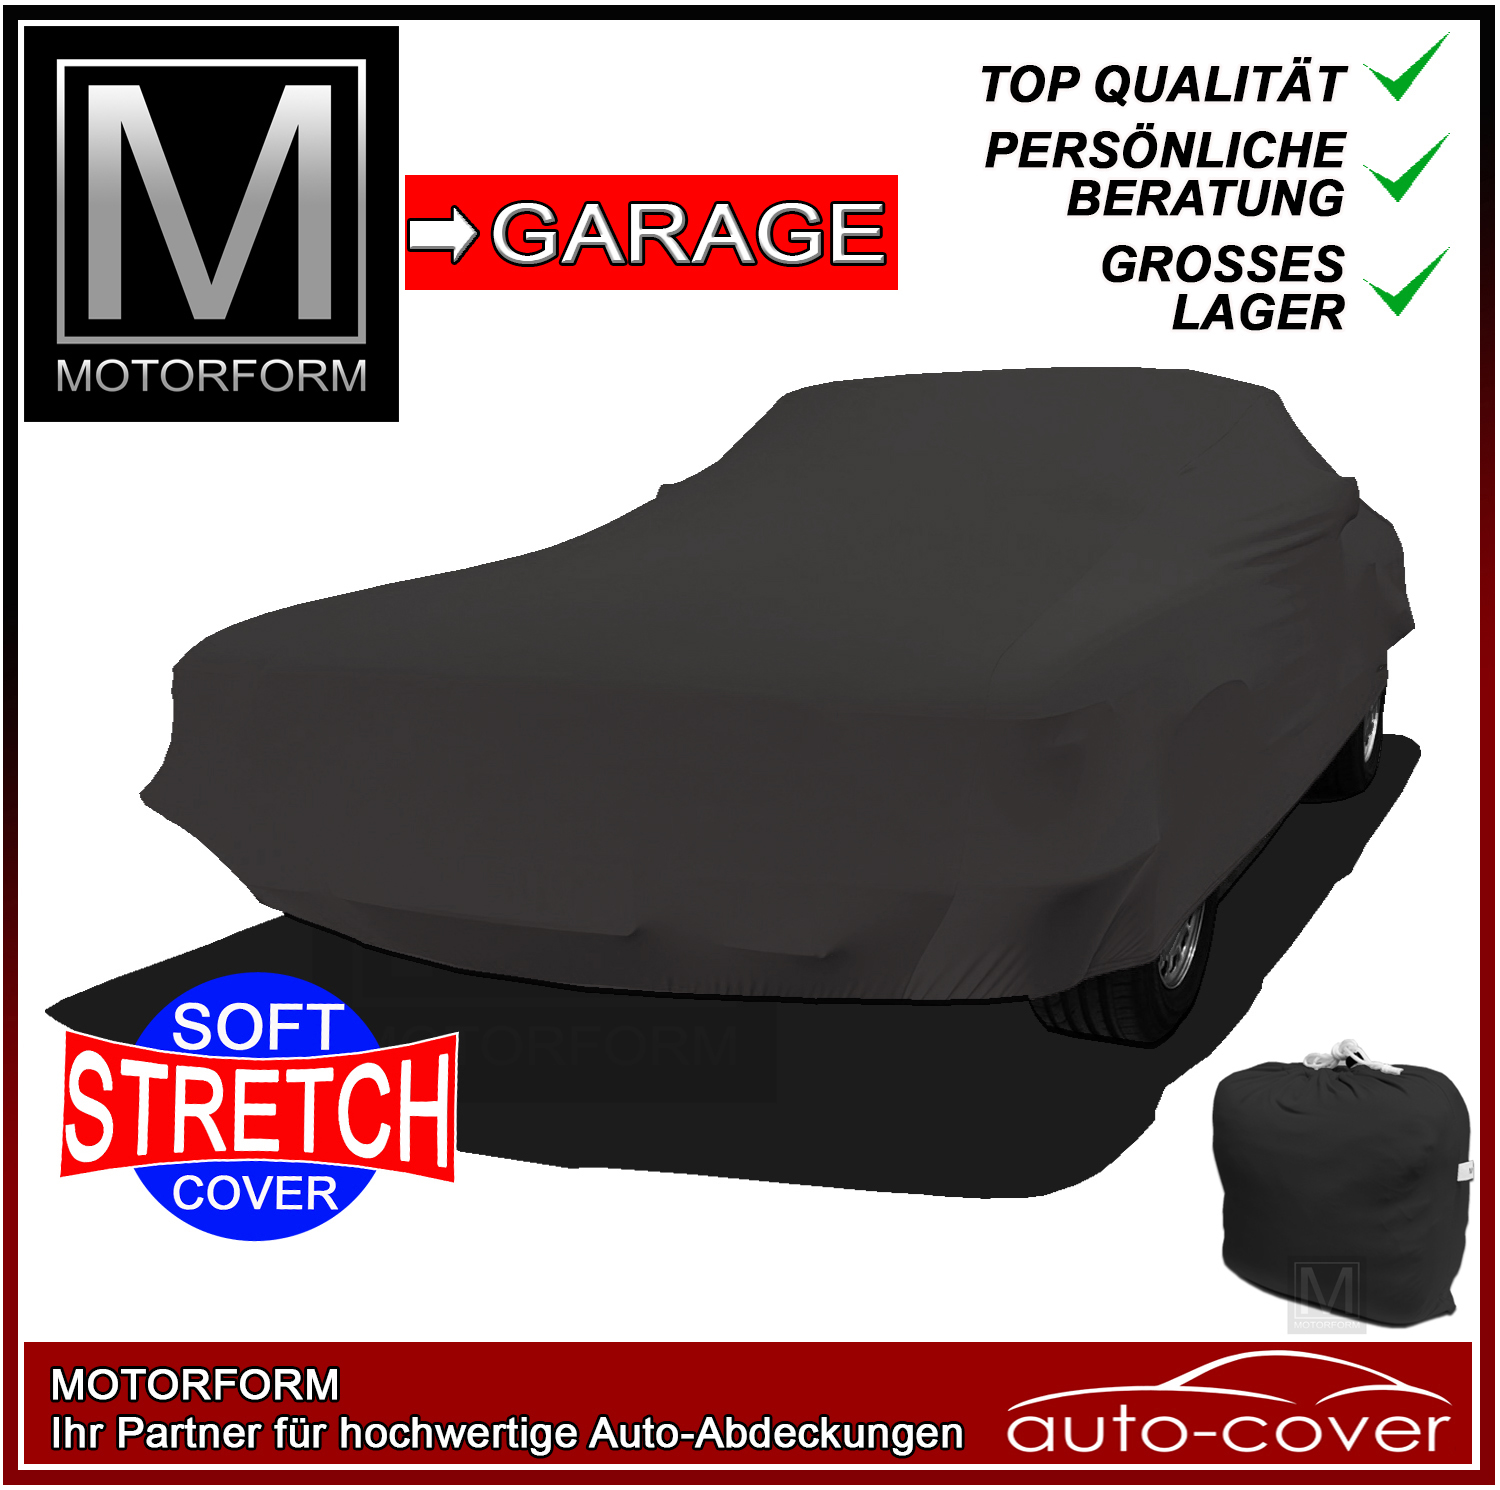 Super Stretchy Cover for Lexus LS 400 (1989-94)